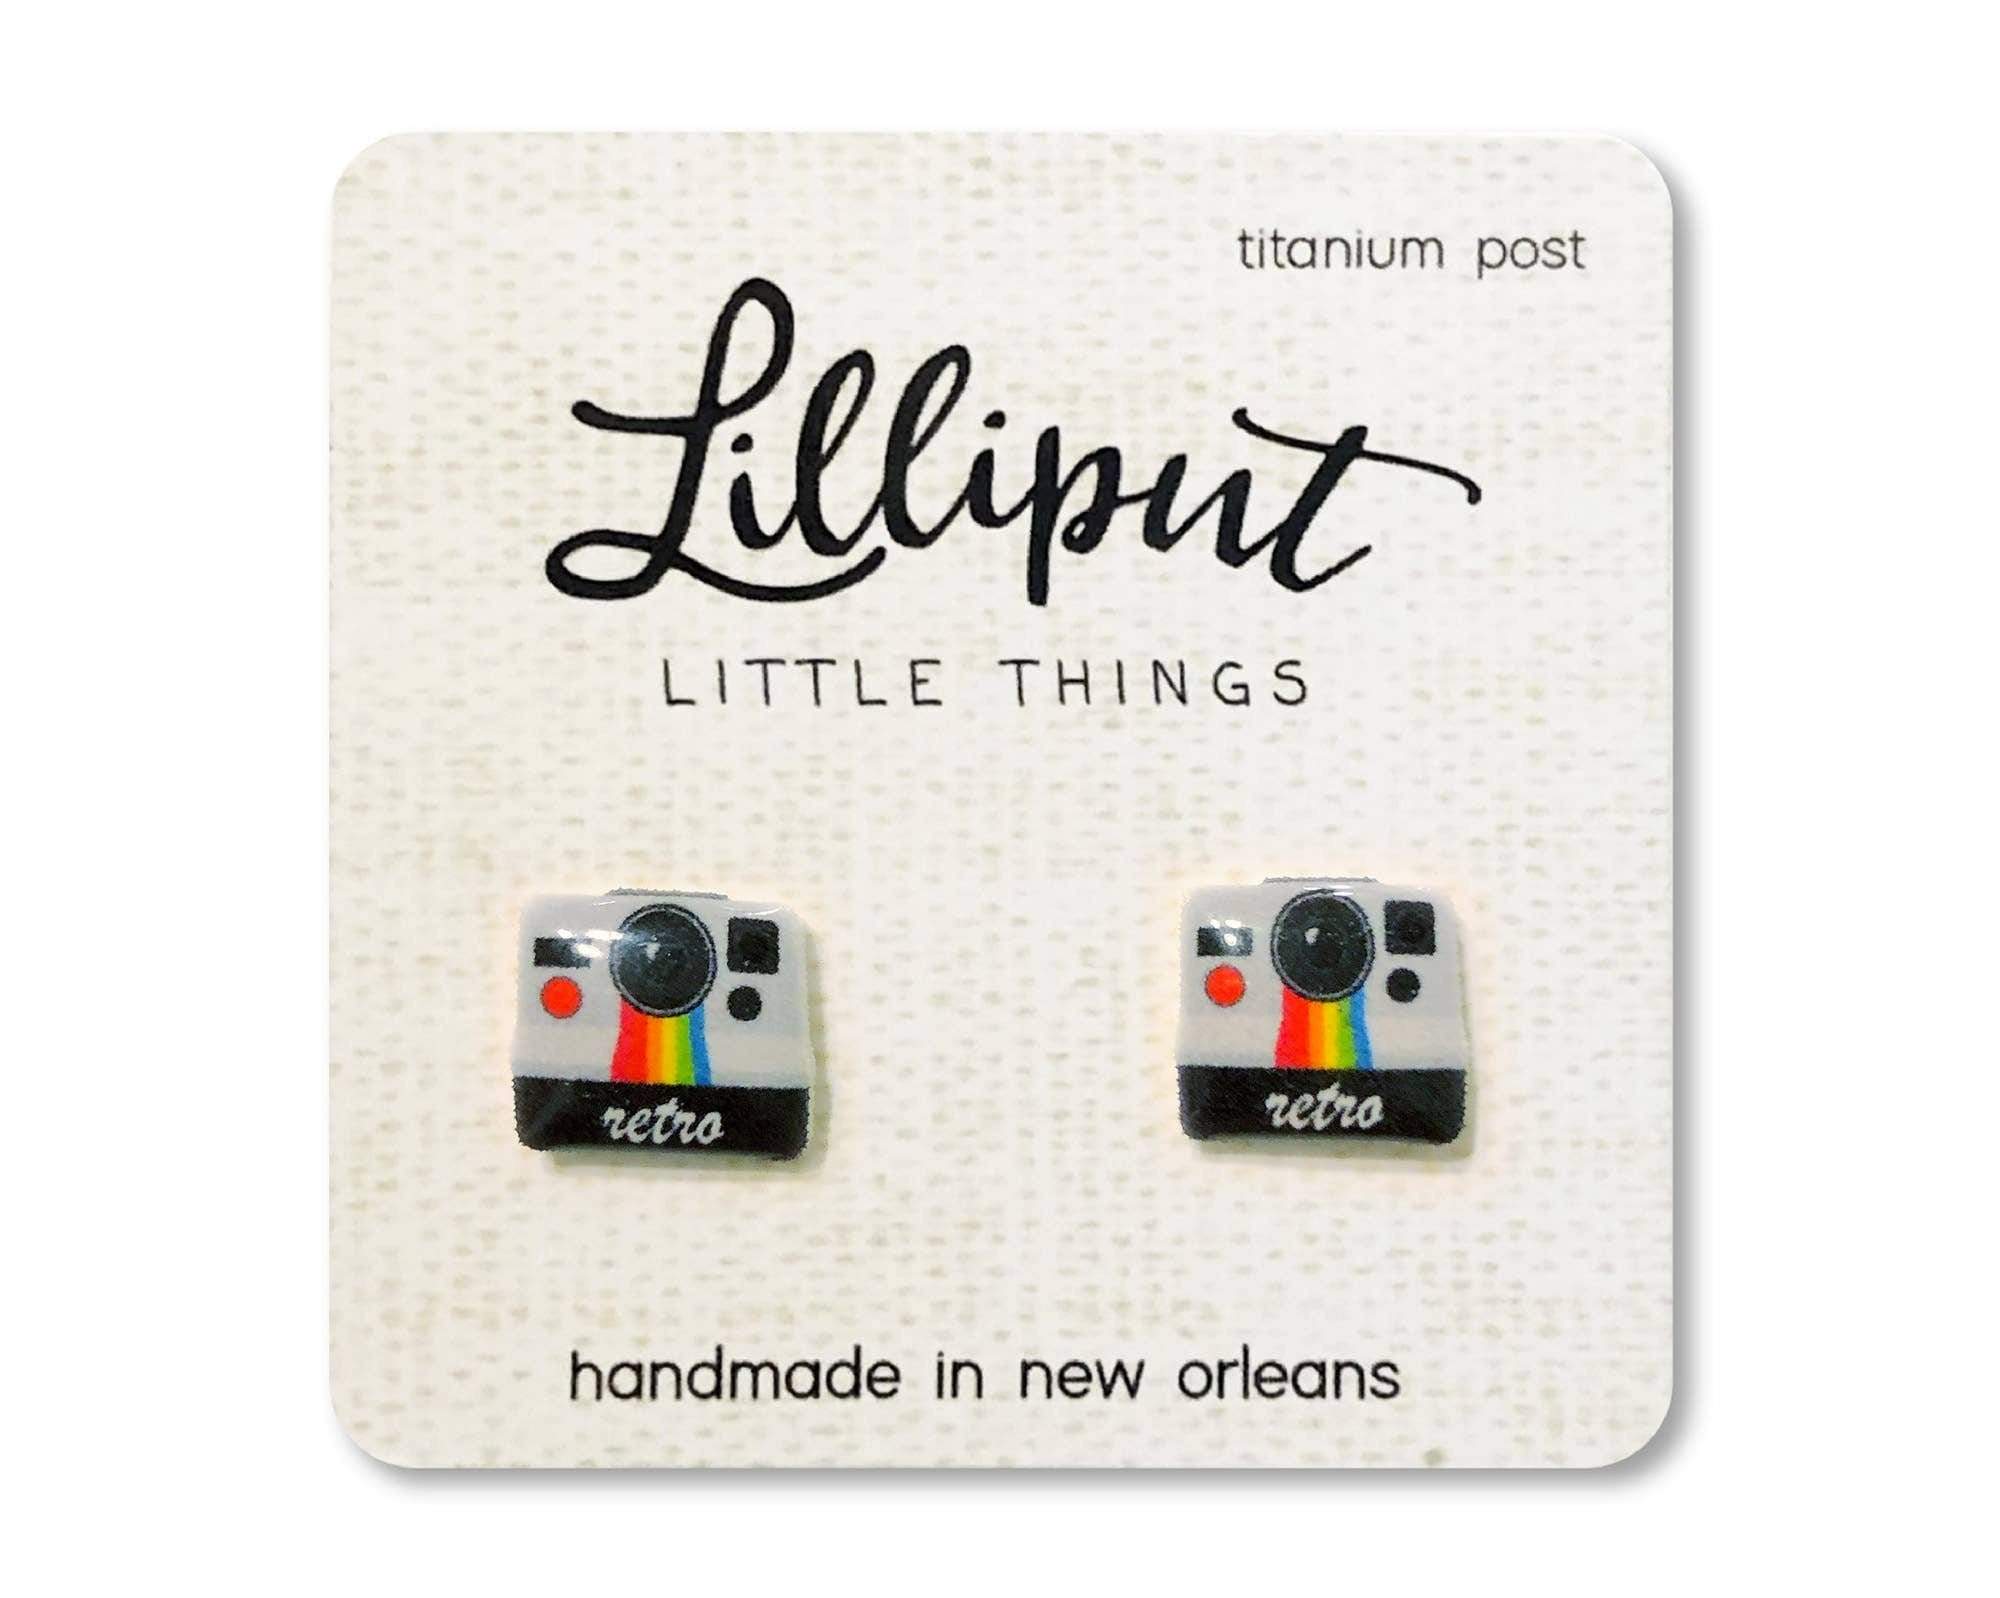 Retro Camera Earrings Lilliput Little Things Clothing/Accessories